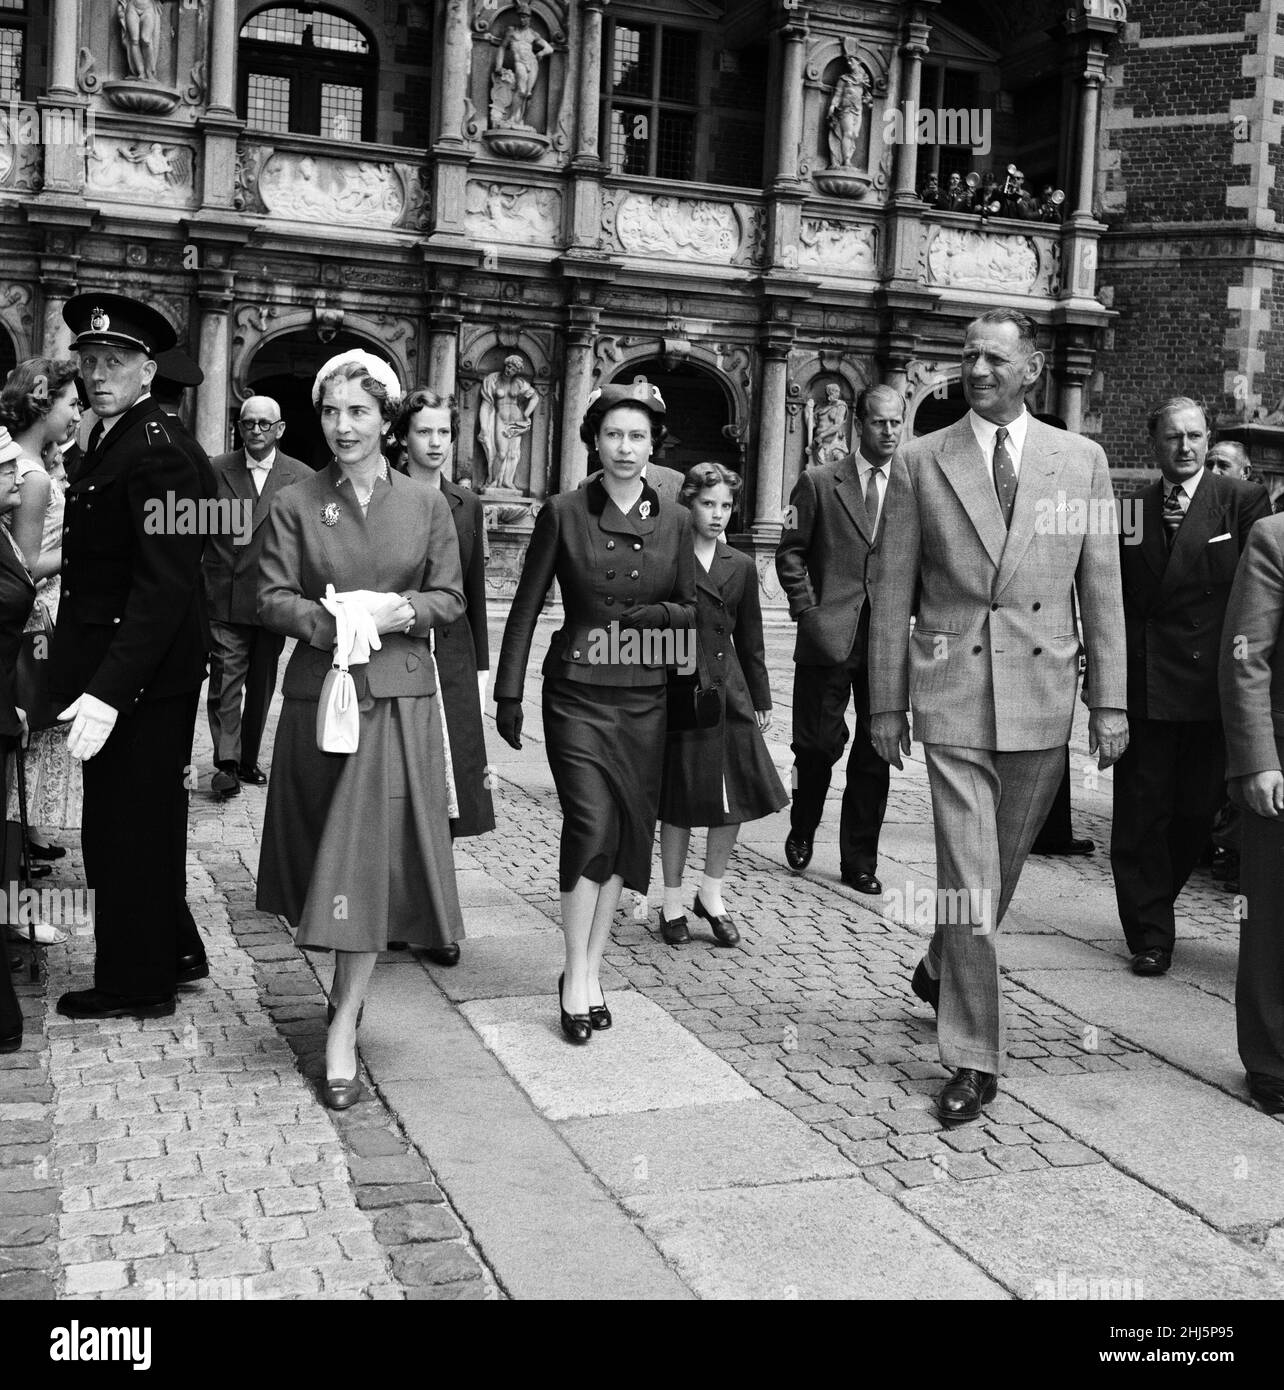 Queen Elizabeth II and Duke of Edinburgh, Prince Philip,  visit the Chapel at Frederiksborg Castle. They were hosted by King Frederik IX and Queen Ingrid of Denmark. Denmark, 25th May 1957. Stock Photo